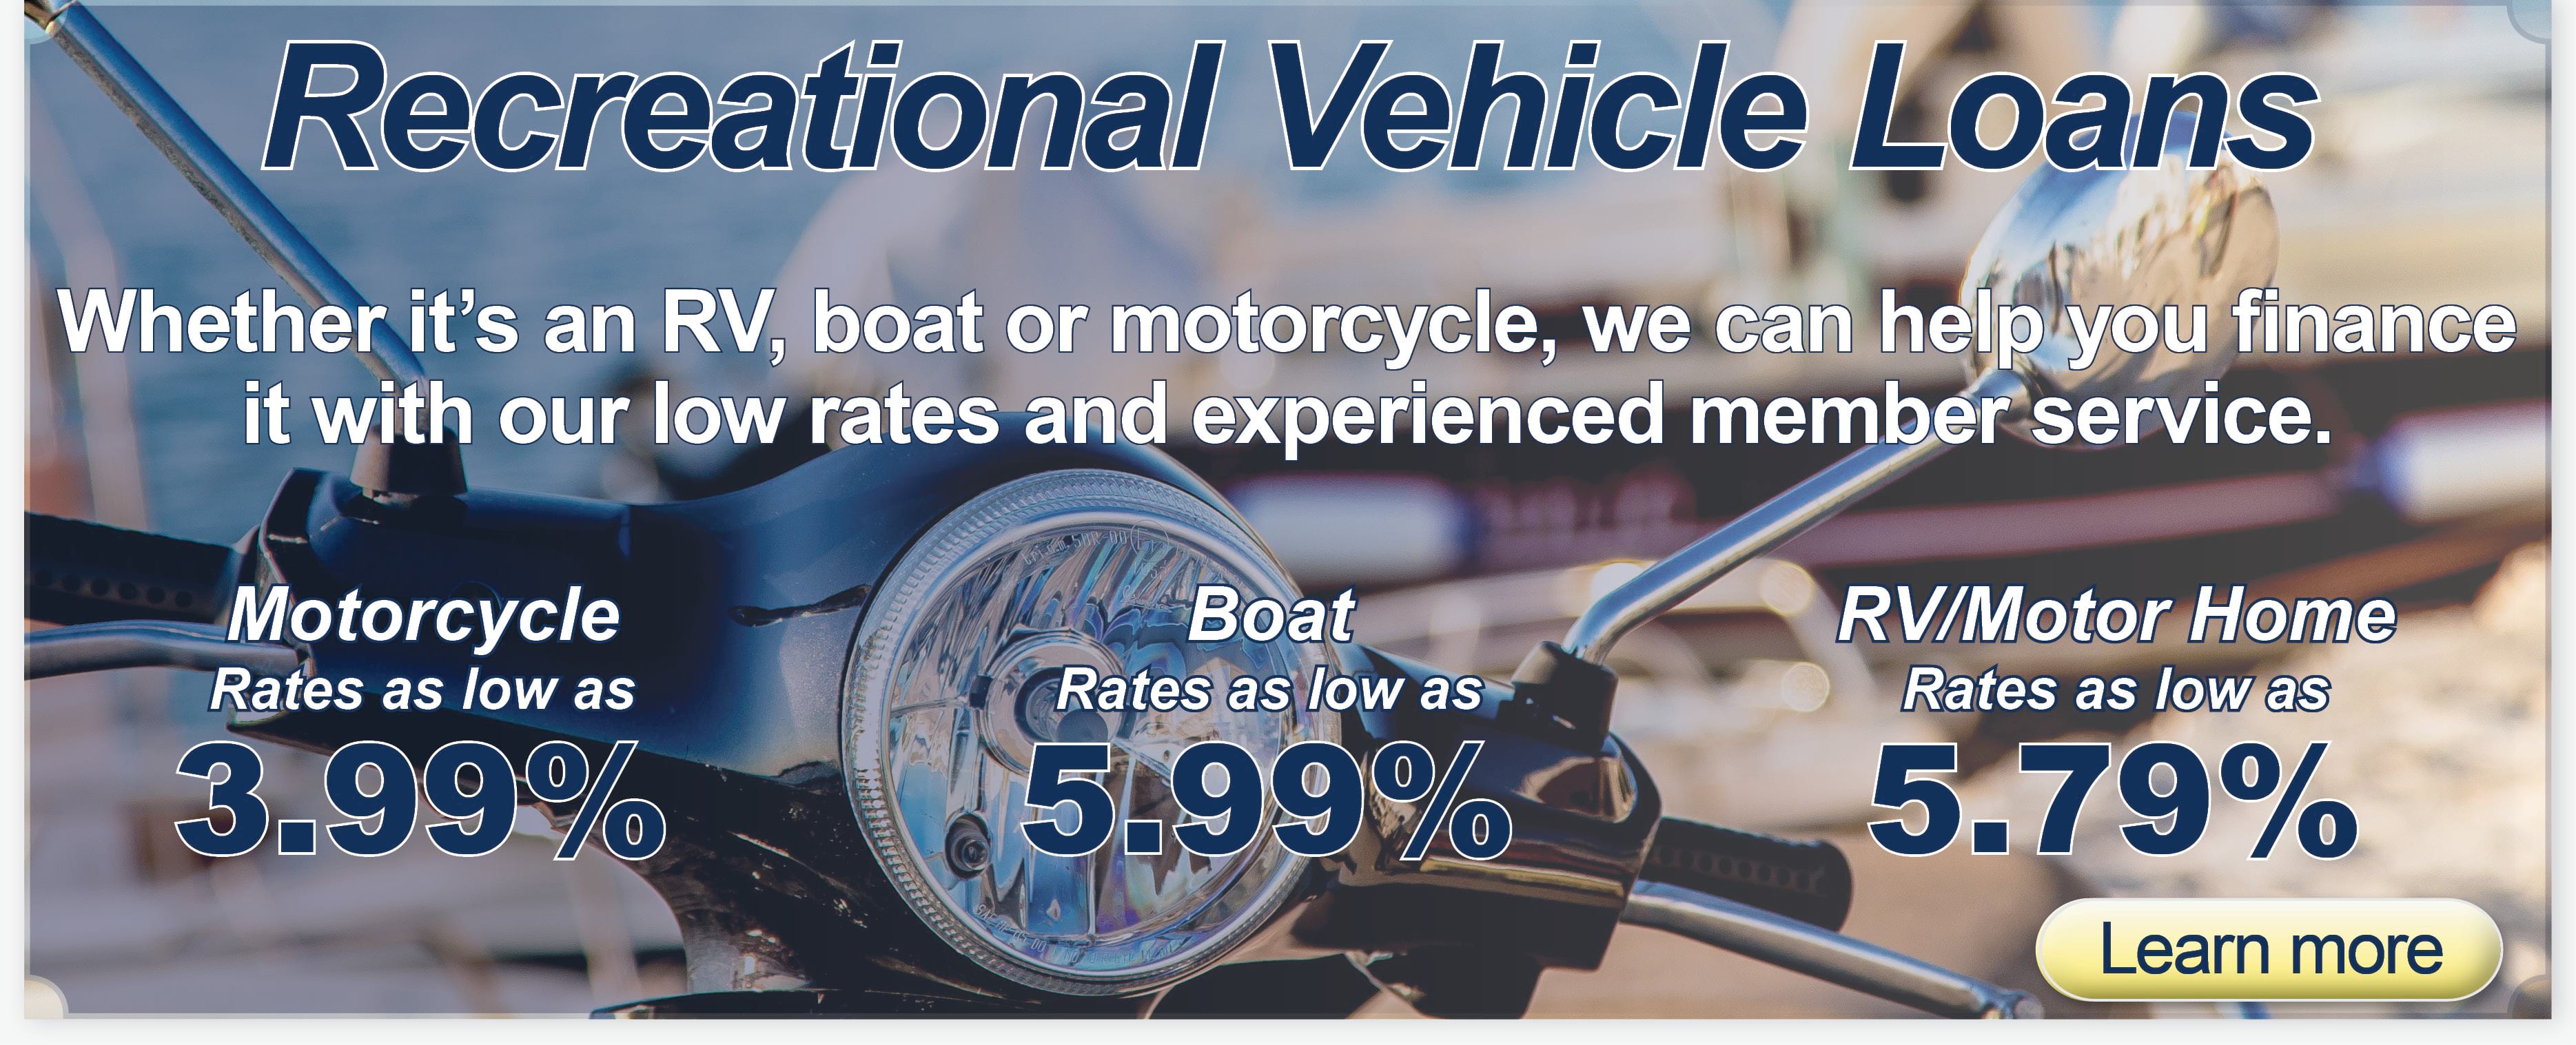 Rec Vehicle Loans. Motorcycle rates as low as 3.99%. Boat loan rates as low as 5.99%. RV/Motor Home rates as low as 5.79%.